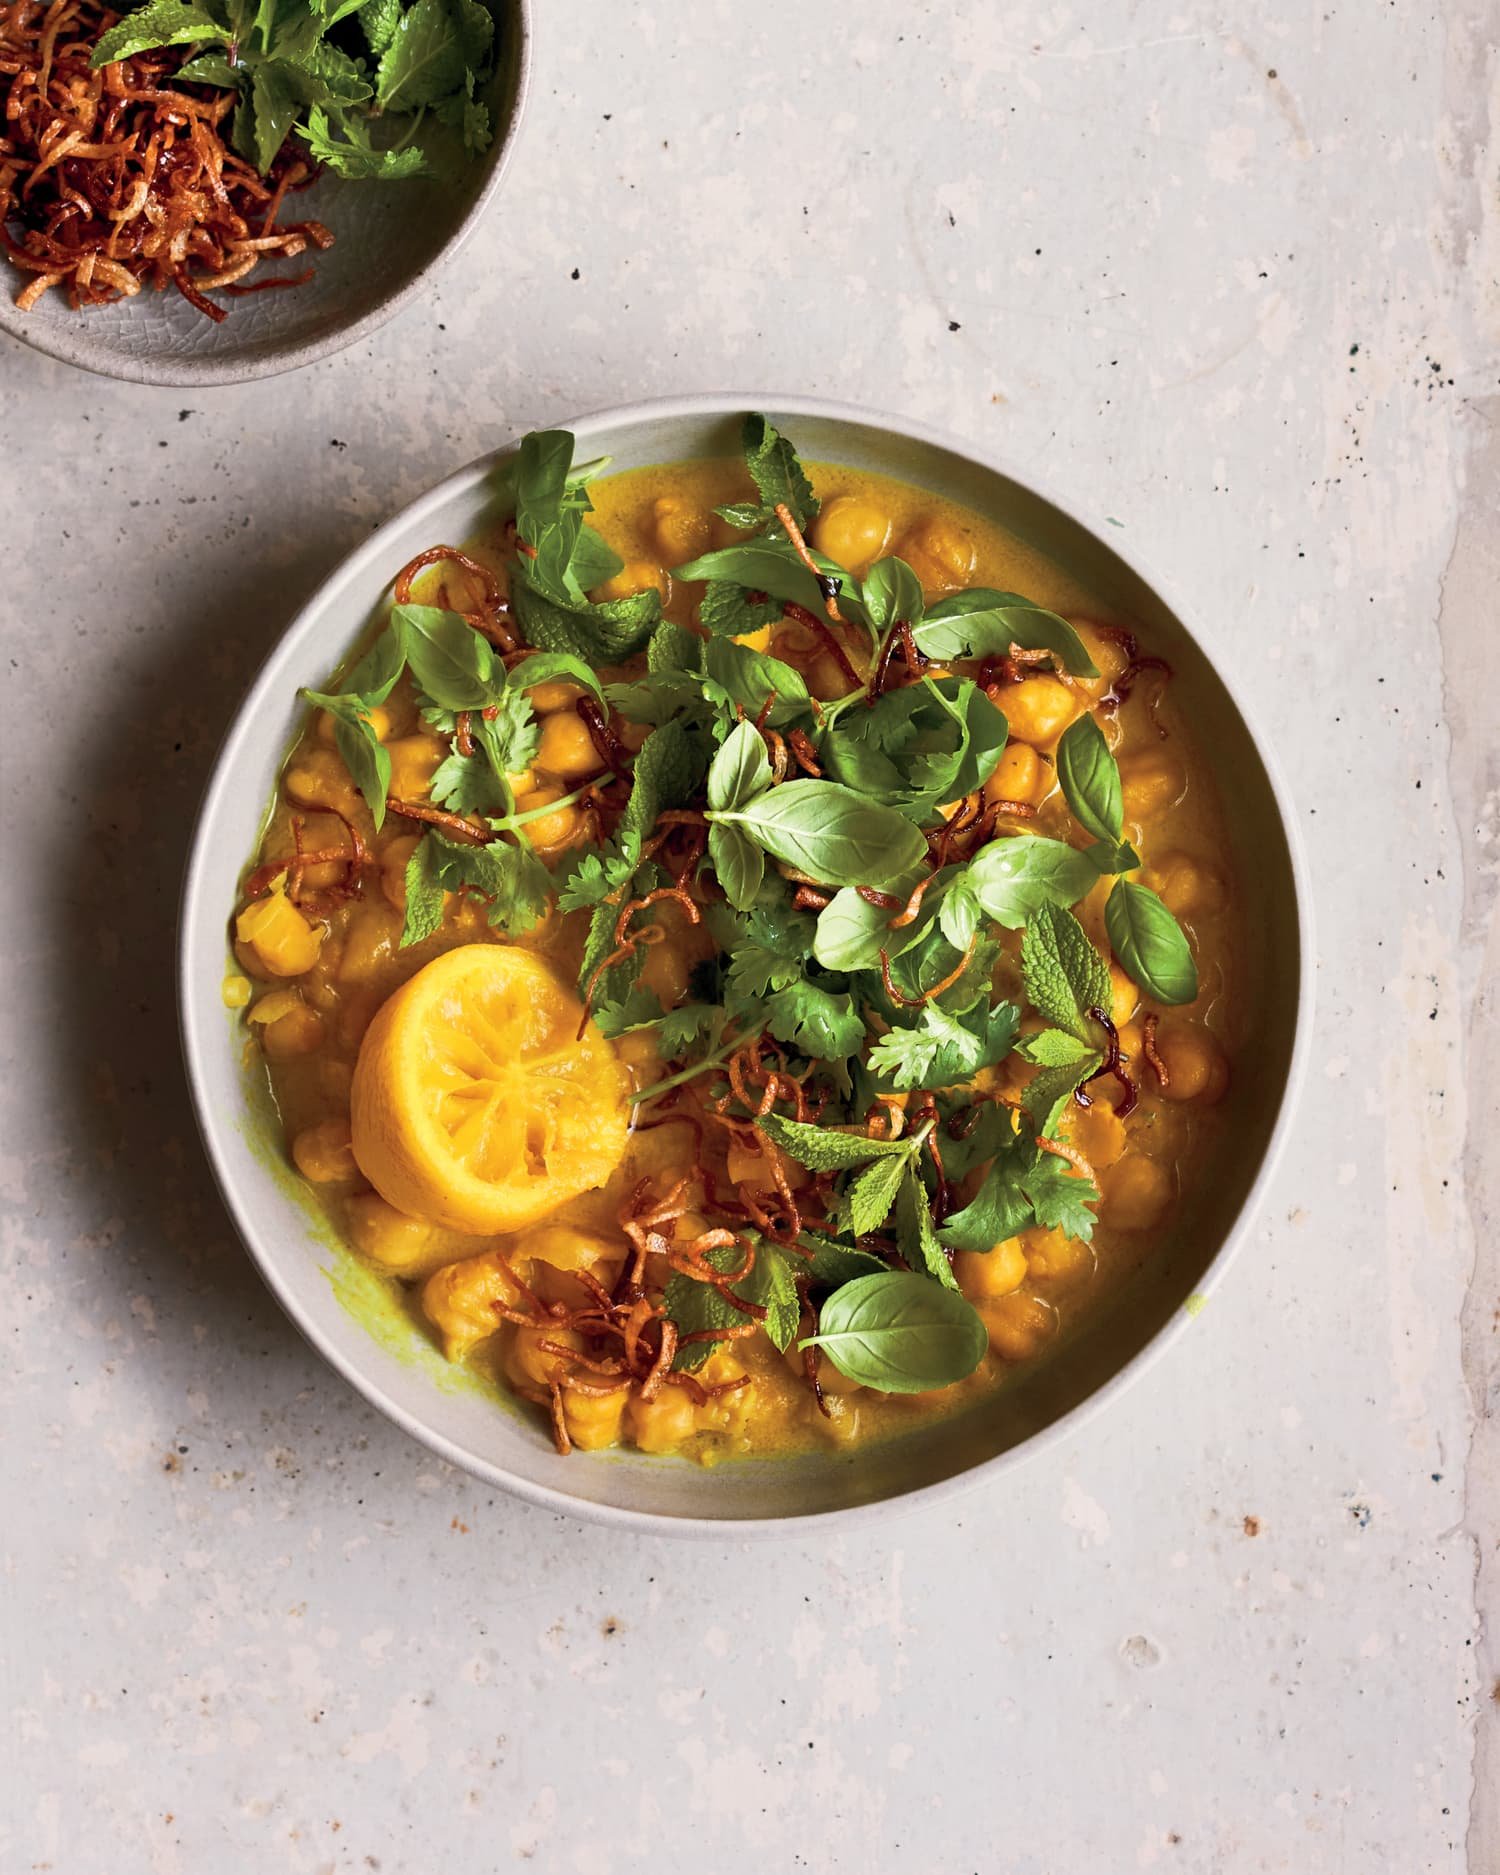 This Lemony Coconut Chickpea Stew Has a Bright, Citrusy Zing